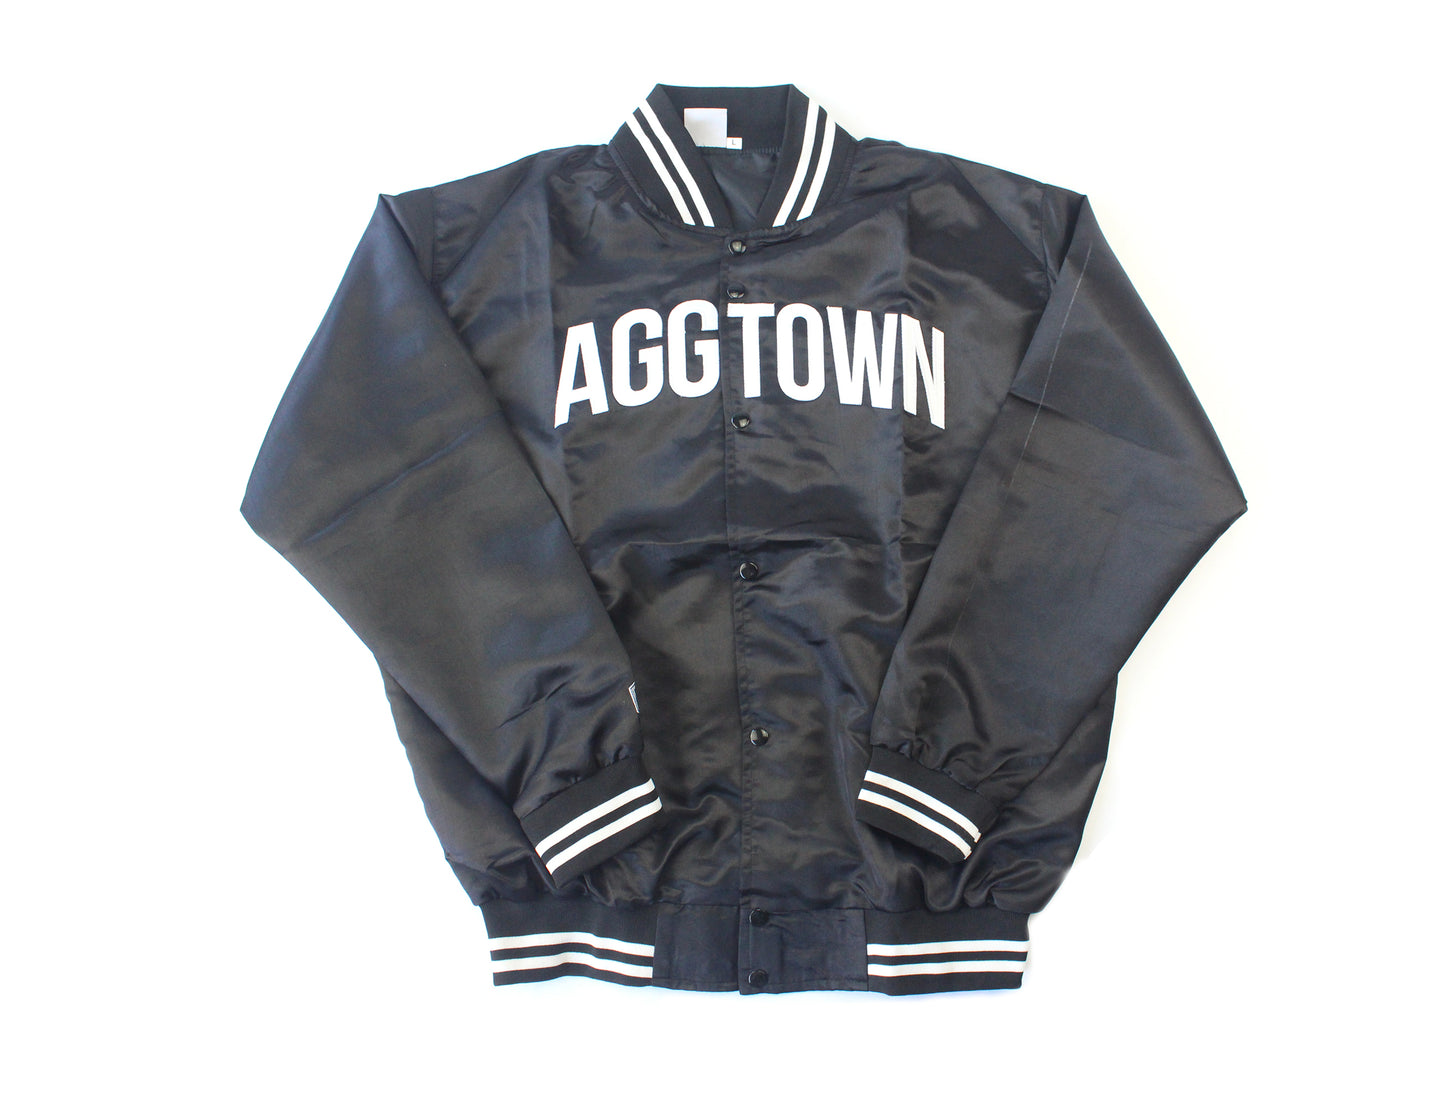 Agg Town Jacket